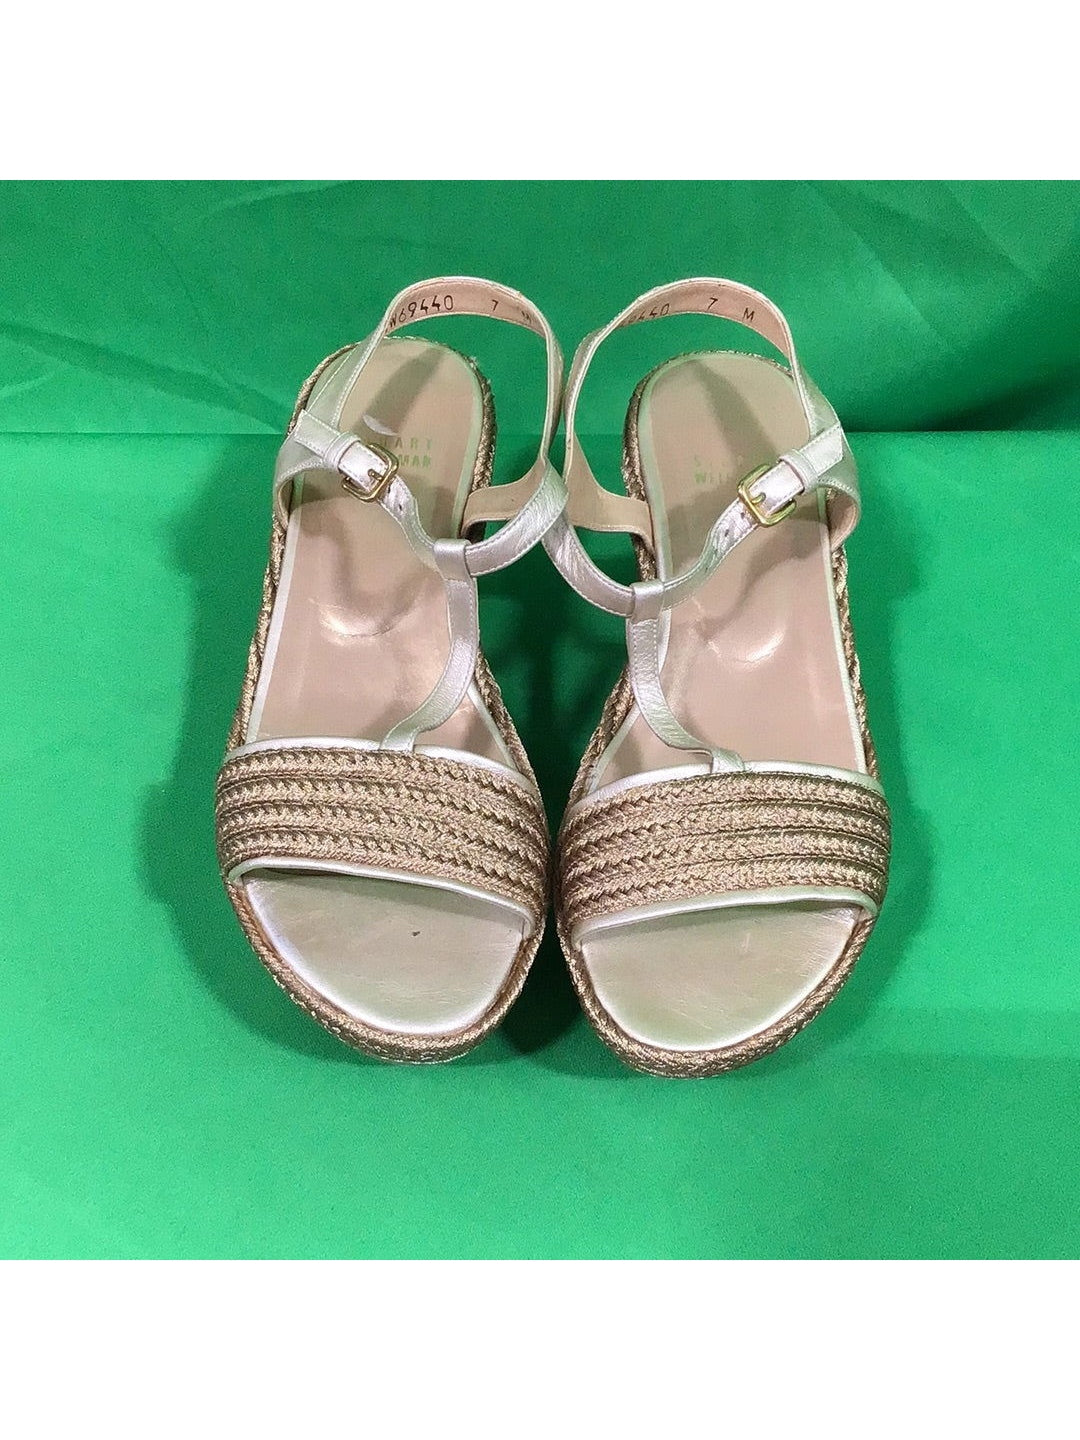 Stuart Weitzman Ladies Size 7 M Gold Metallic Open Toe Wedge Shoes - In Box - The Kennedy Collective Thrift - 